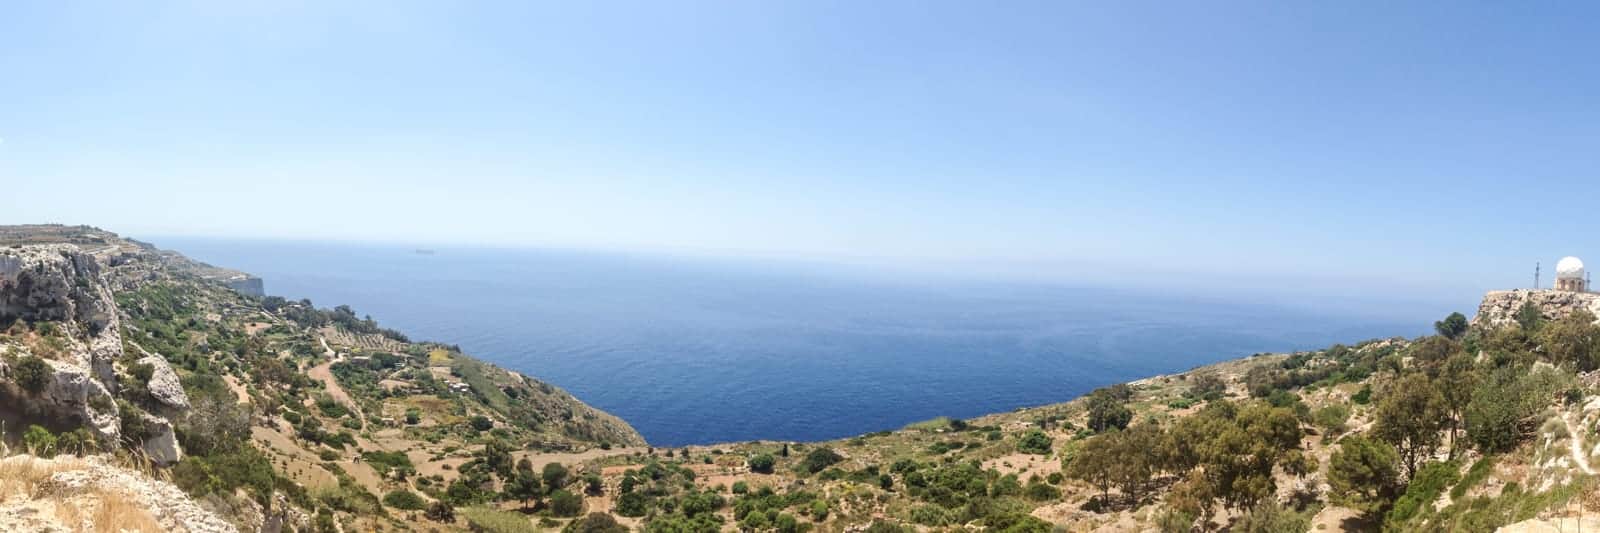 Panoramic view from the top of the Dingli Cliffs in Malta